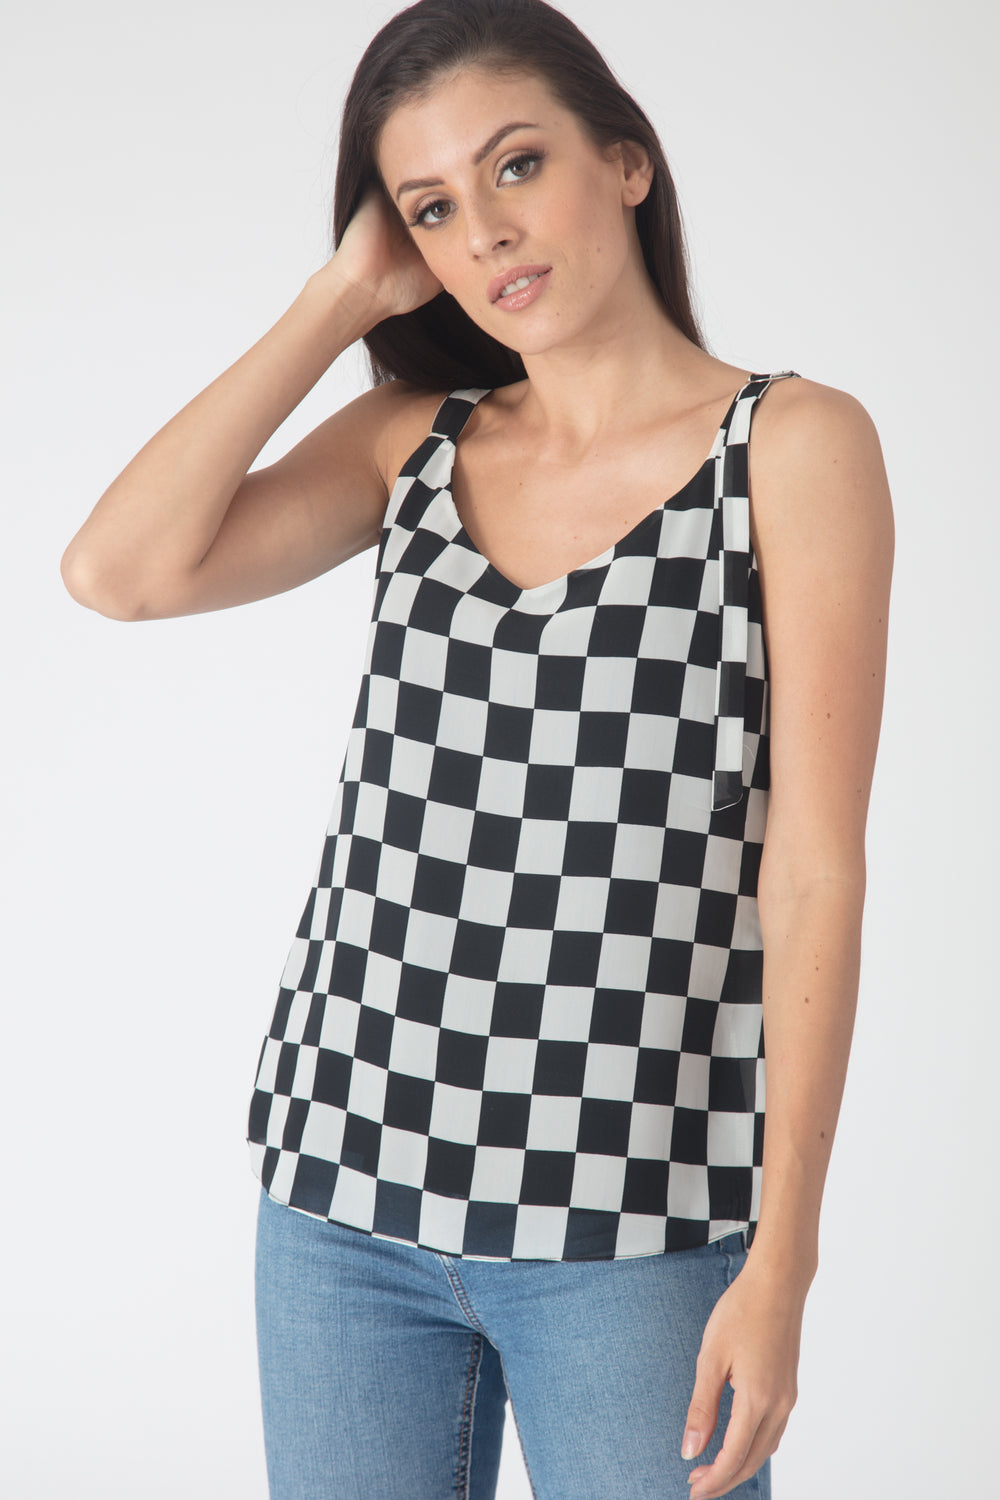 Checkmate Buckle Top